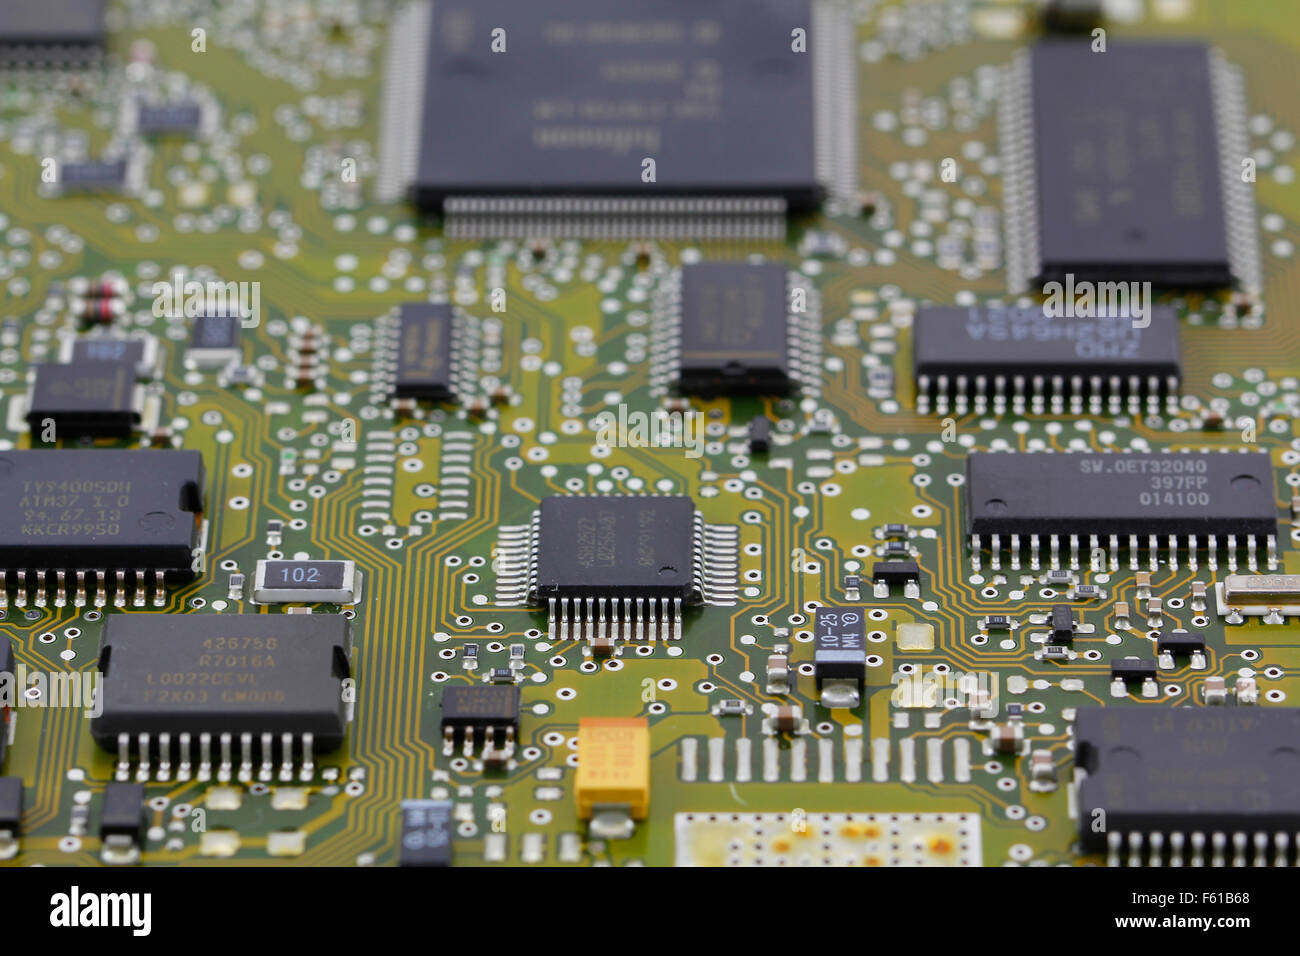 Microchips in a motherboard, electronic components Stock Photo